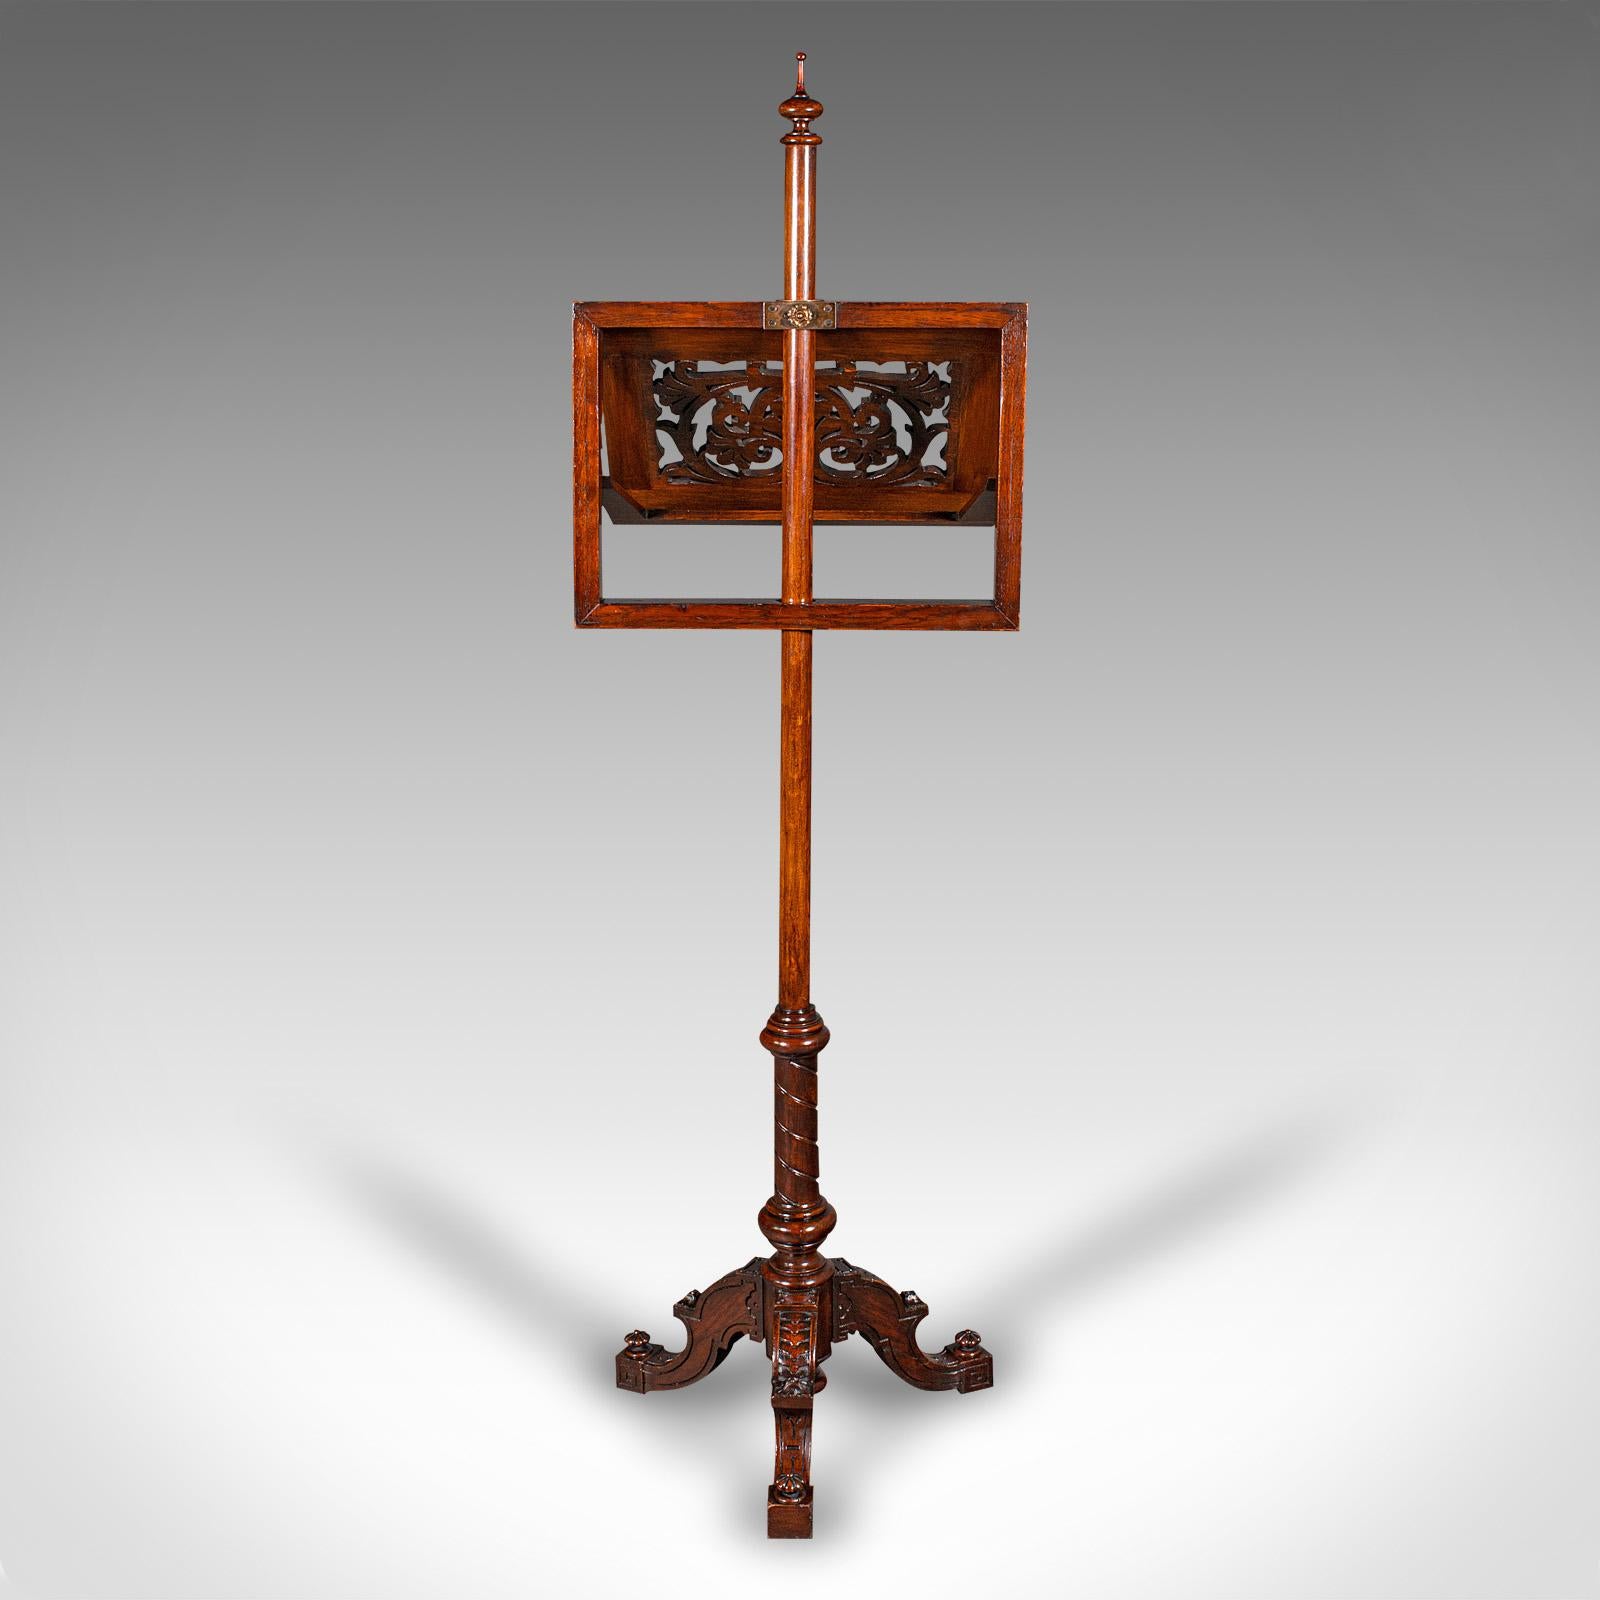 Tall Antique Music Stand, English, Oak, Adjustable Recital Rest, Victorian, 1880 For Sale 2